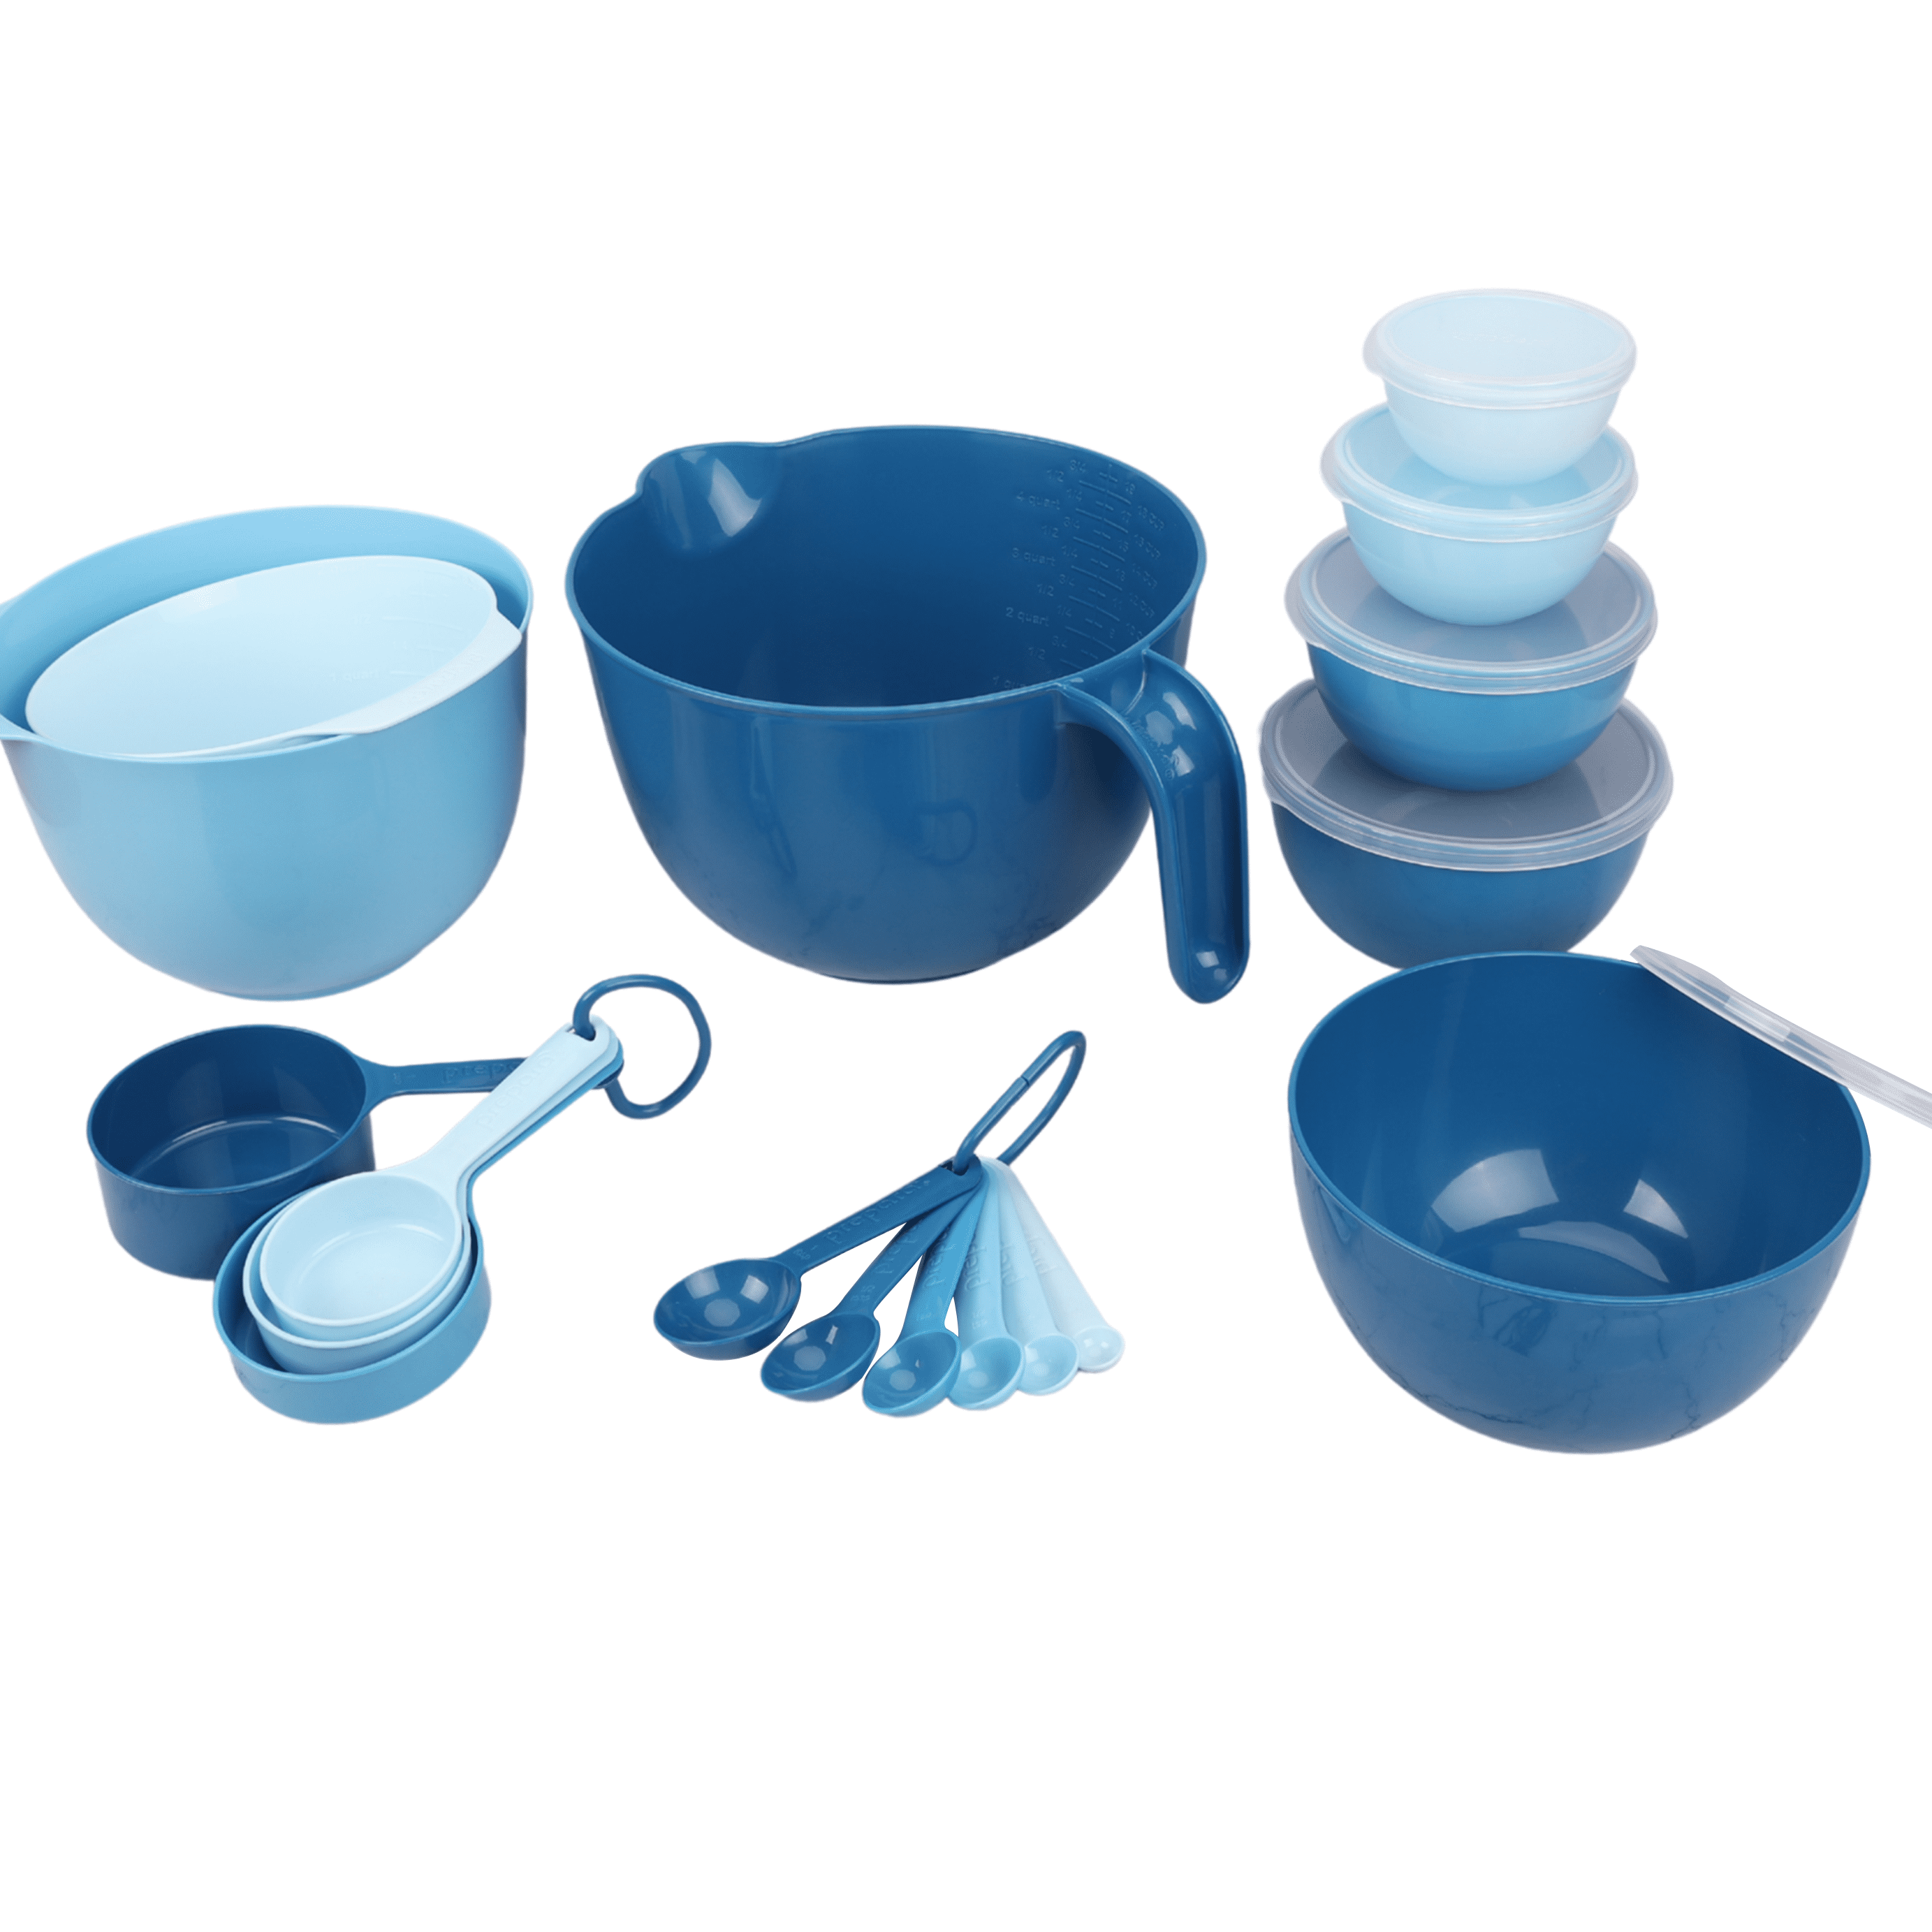 Pampered Chef, 8 Cup, 2 qt, Glass, Measuring, Mixing, Batter Bowl